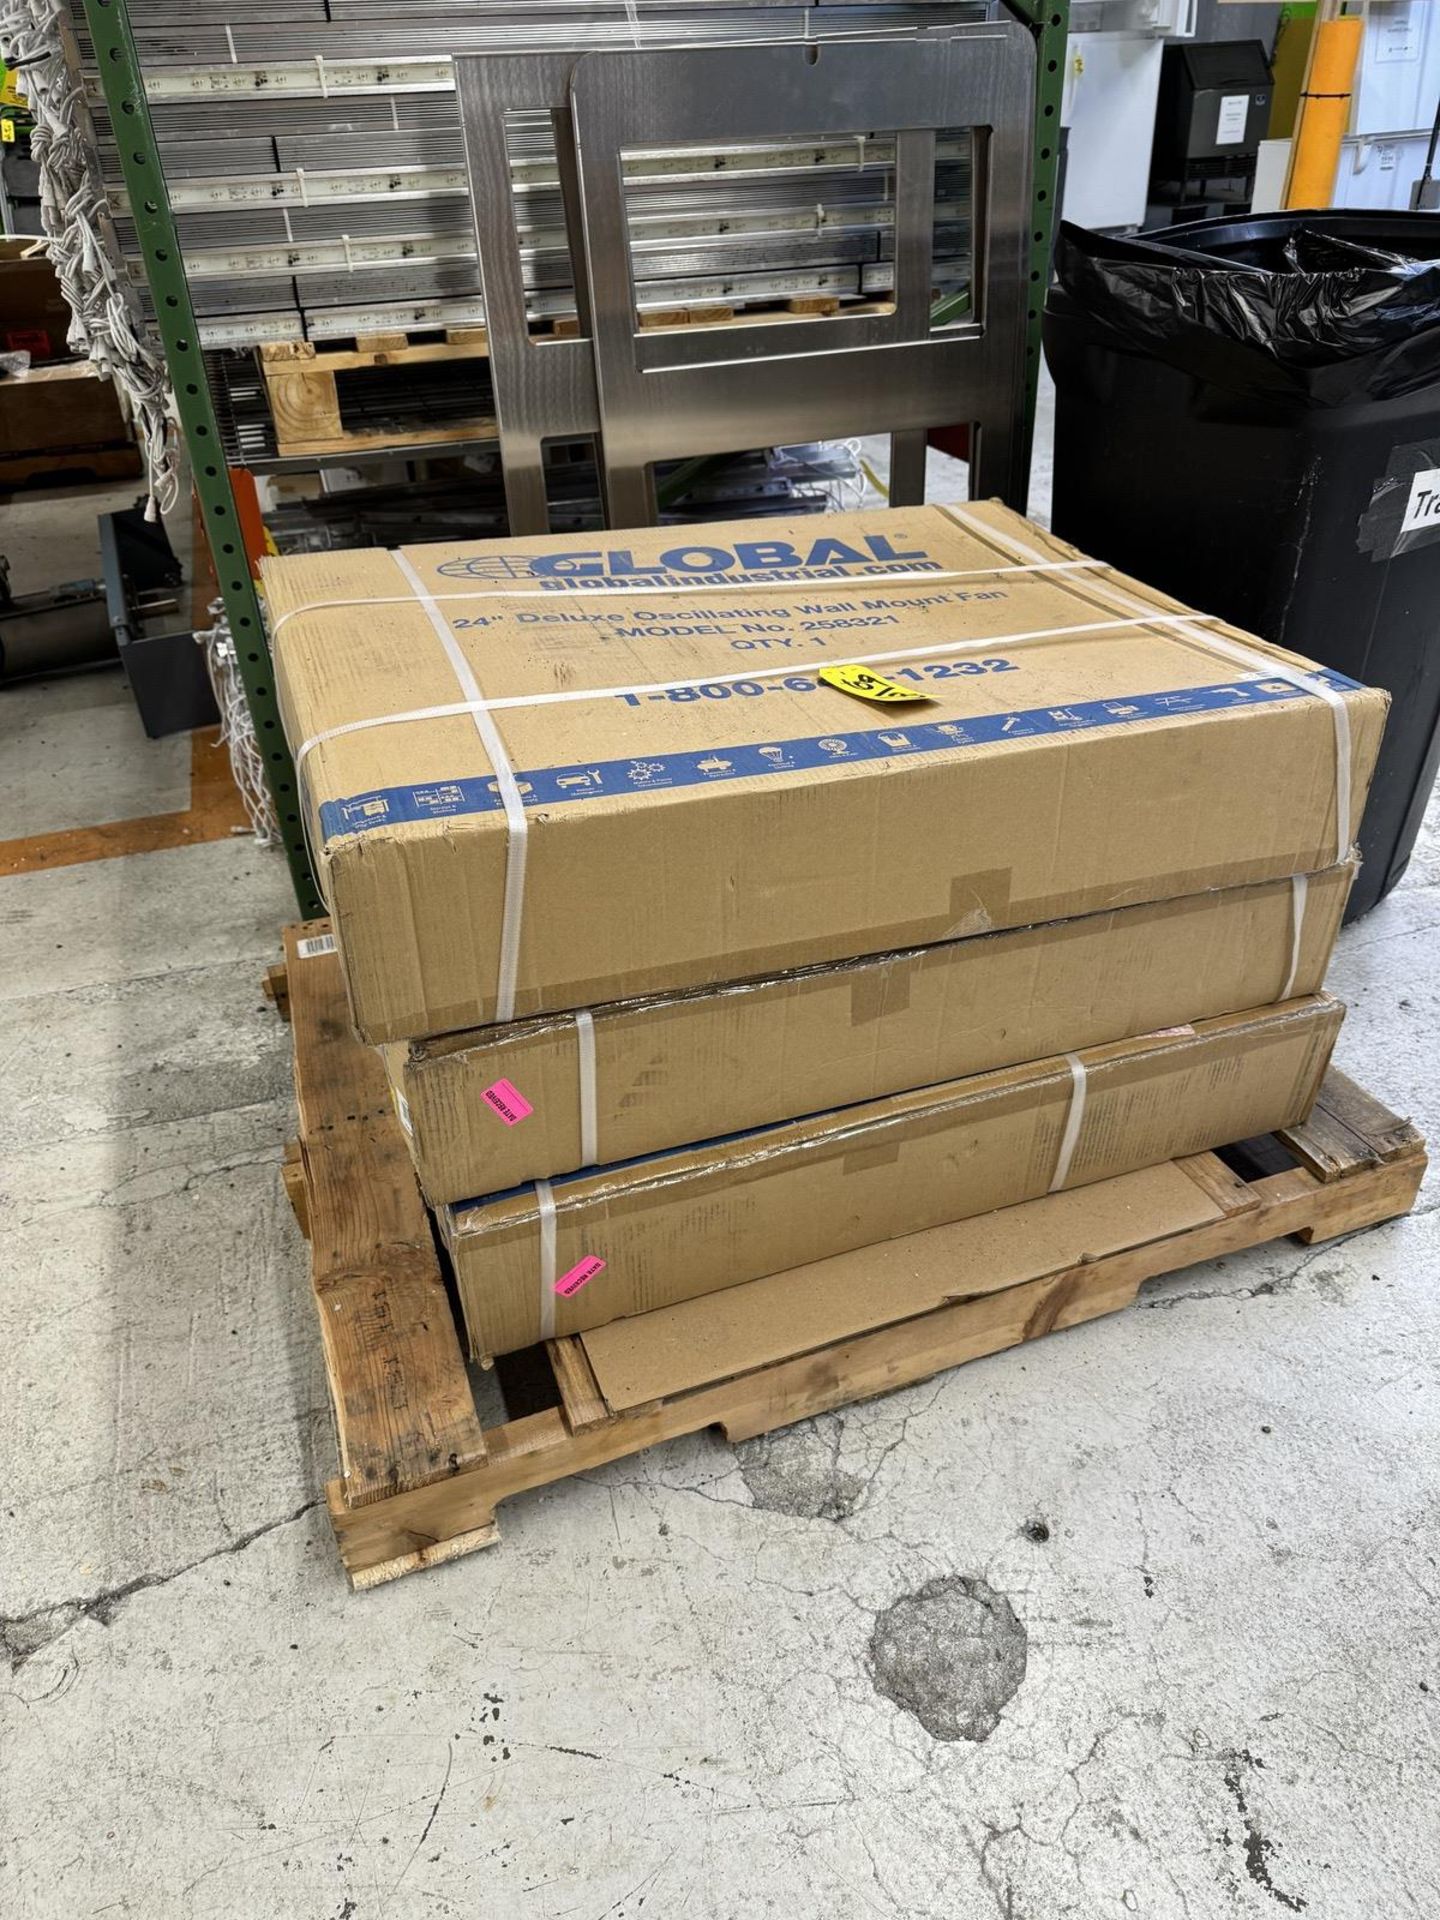 Lot (3) Global Model 258321 24" Deluxe Oscillating Wall Mounted Fans. New in Boxes - Image 2 of 2